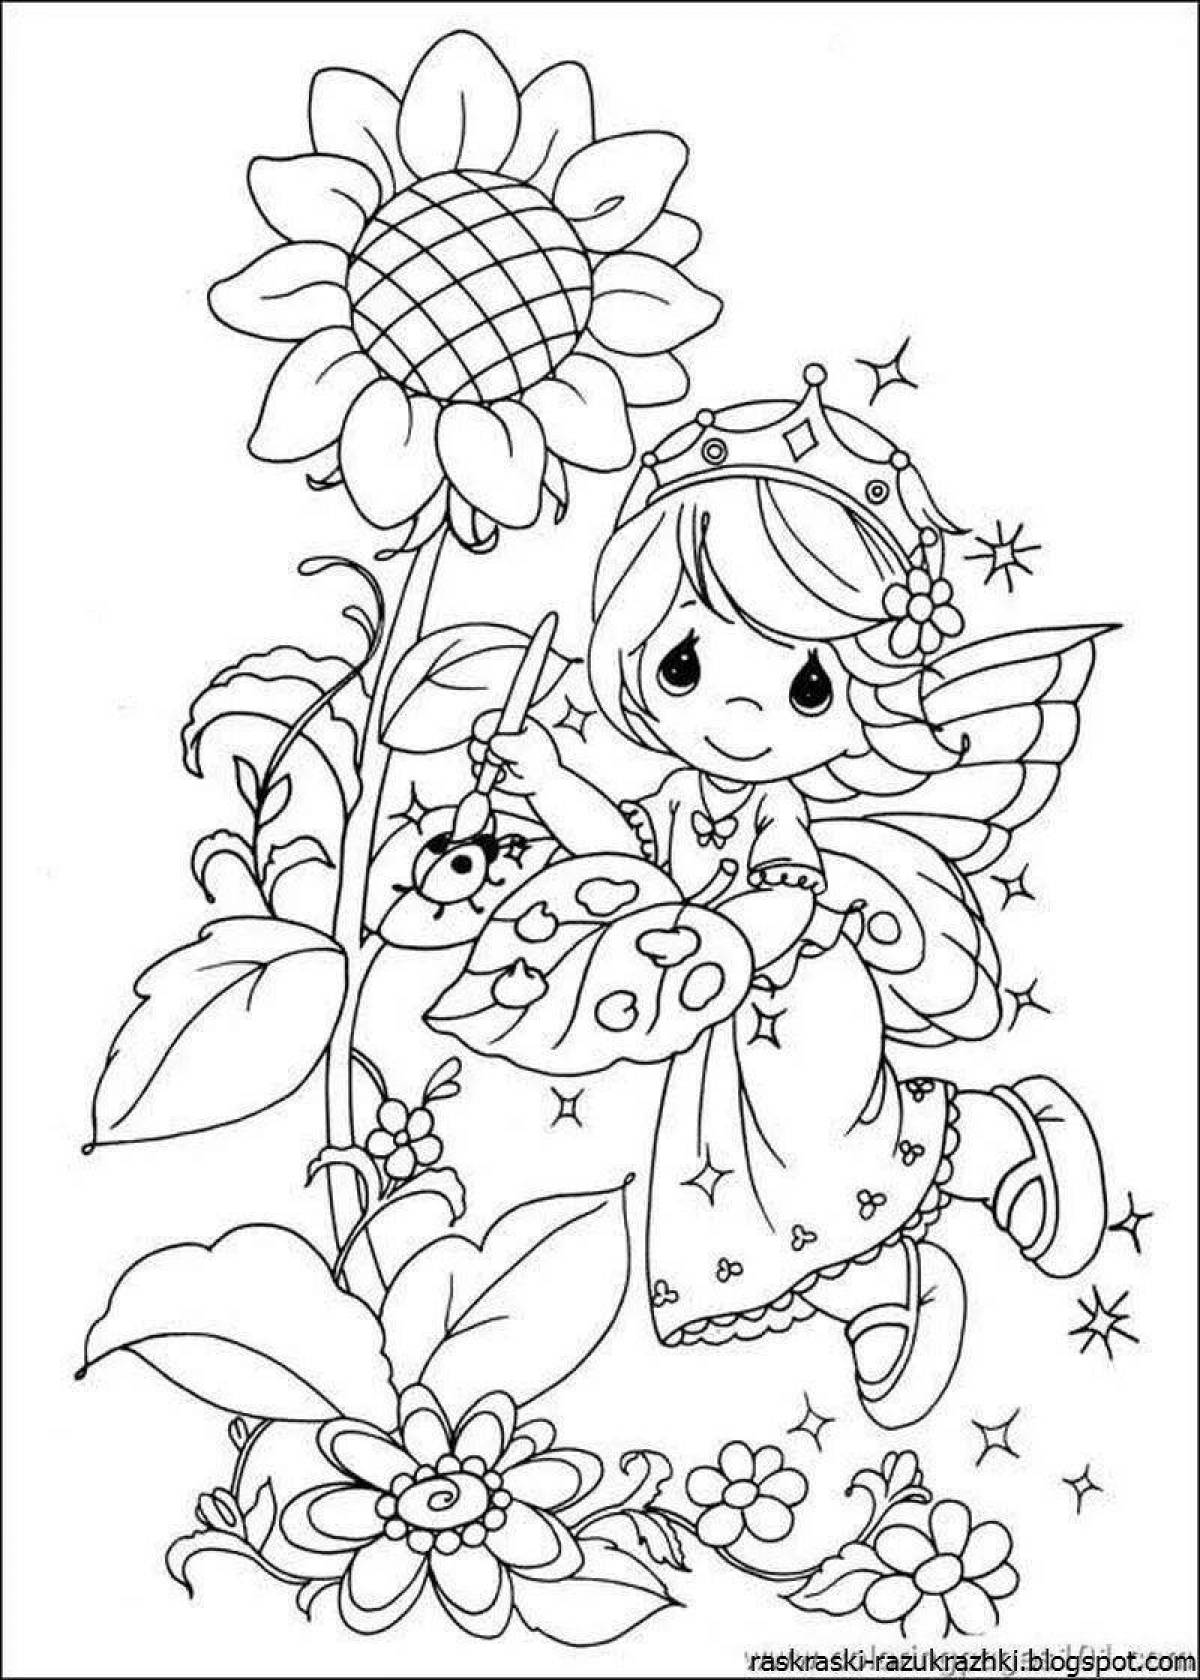 Creative coloring for girls 7 years 1st grade